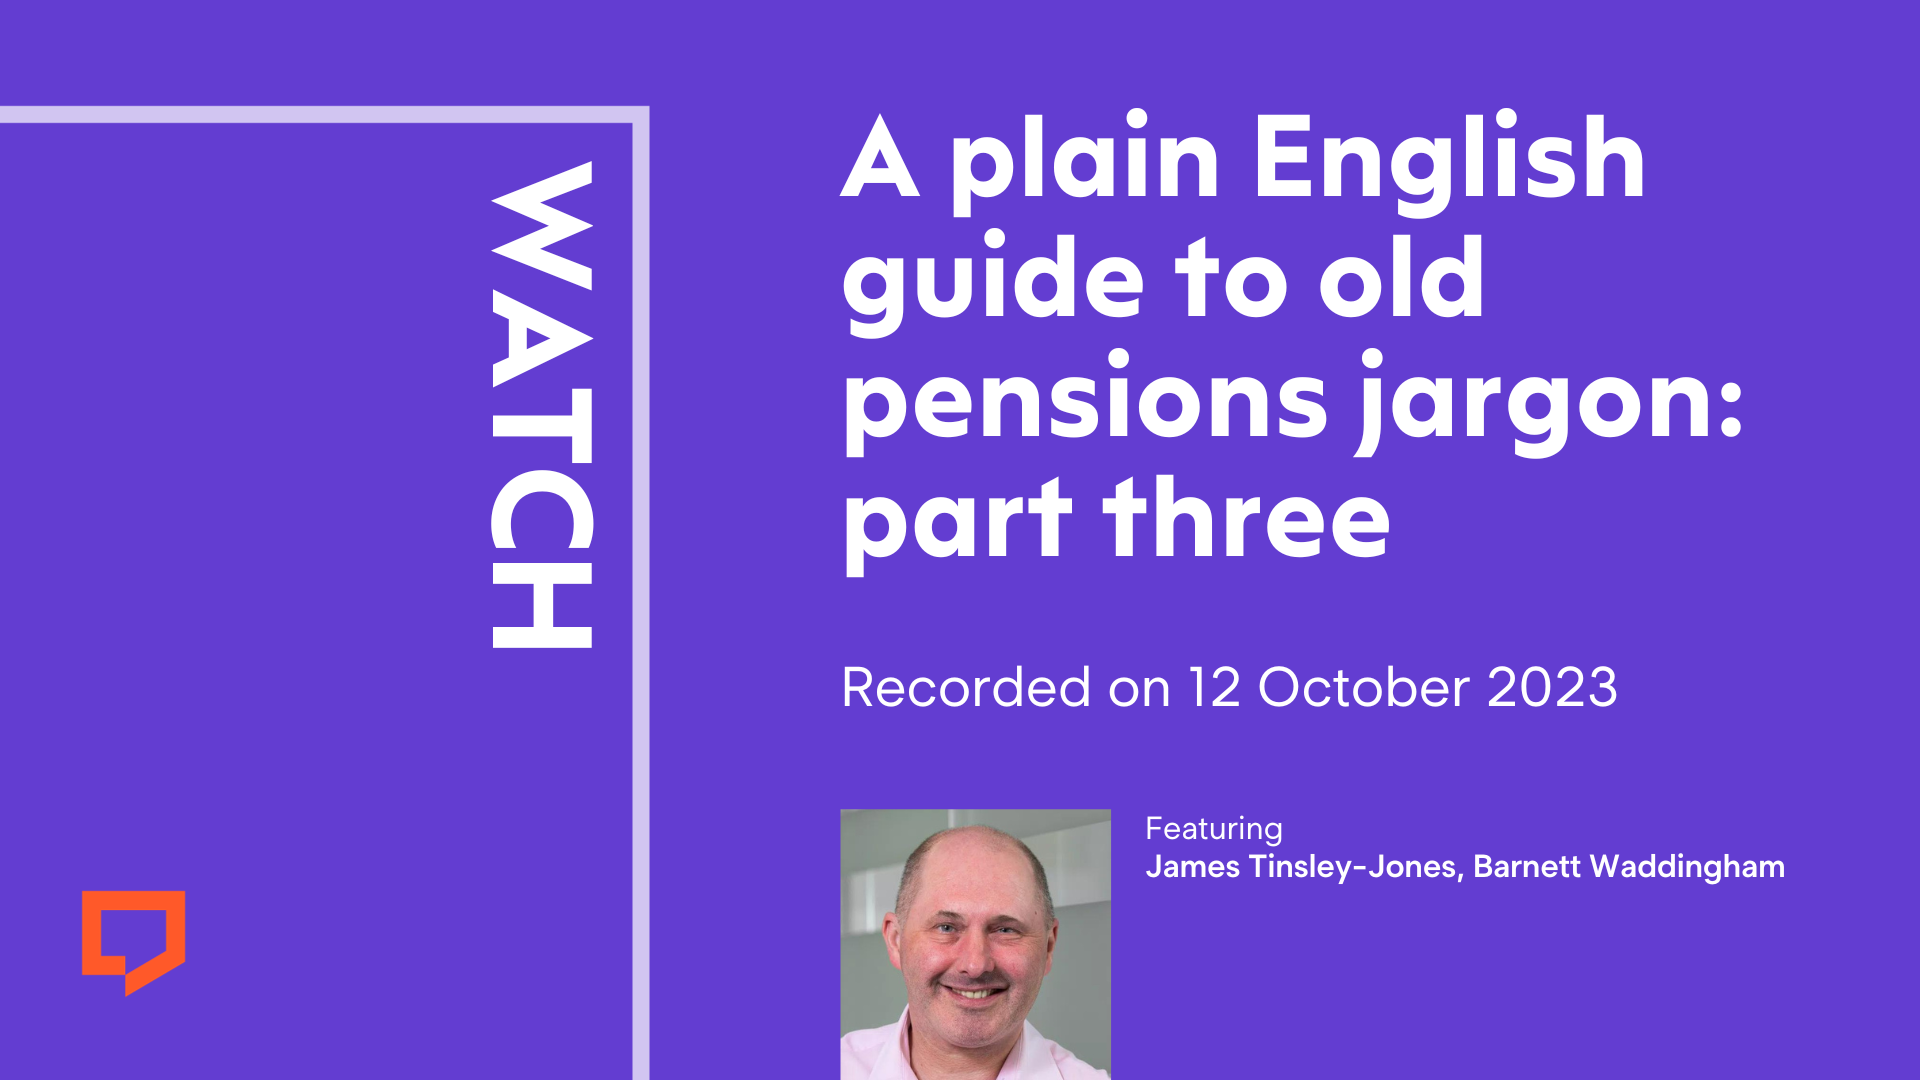 A plain English guide to old pensions jargon: part three